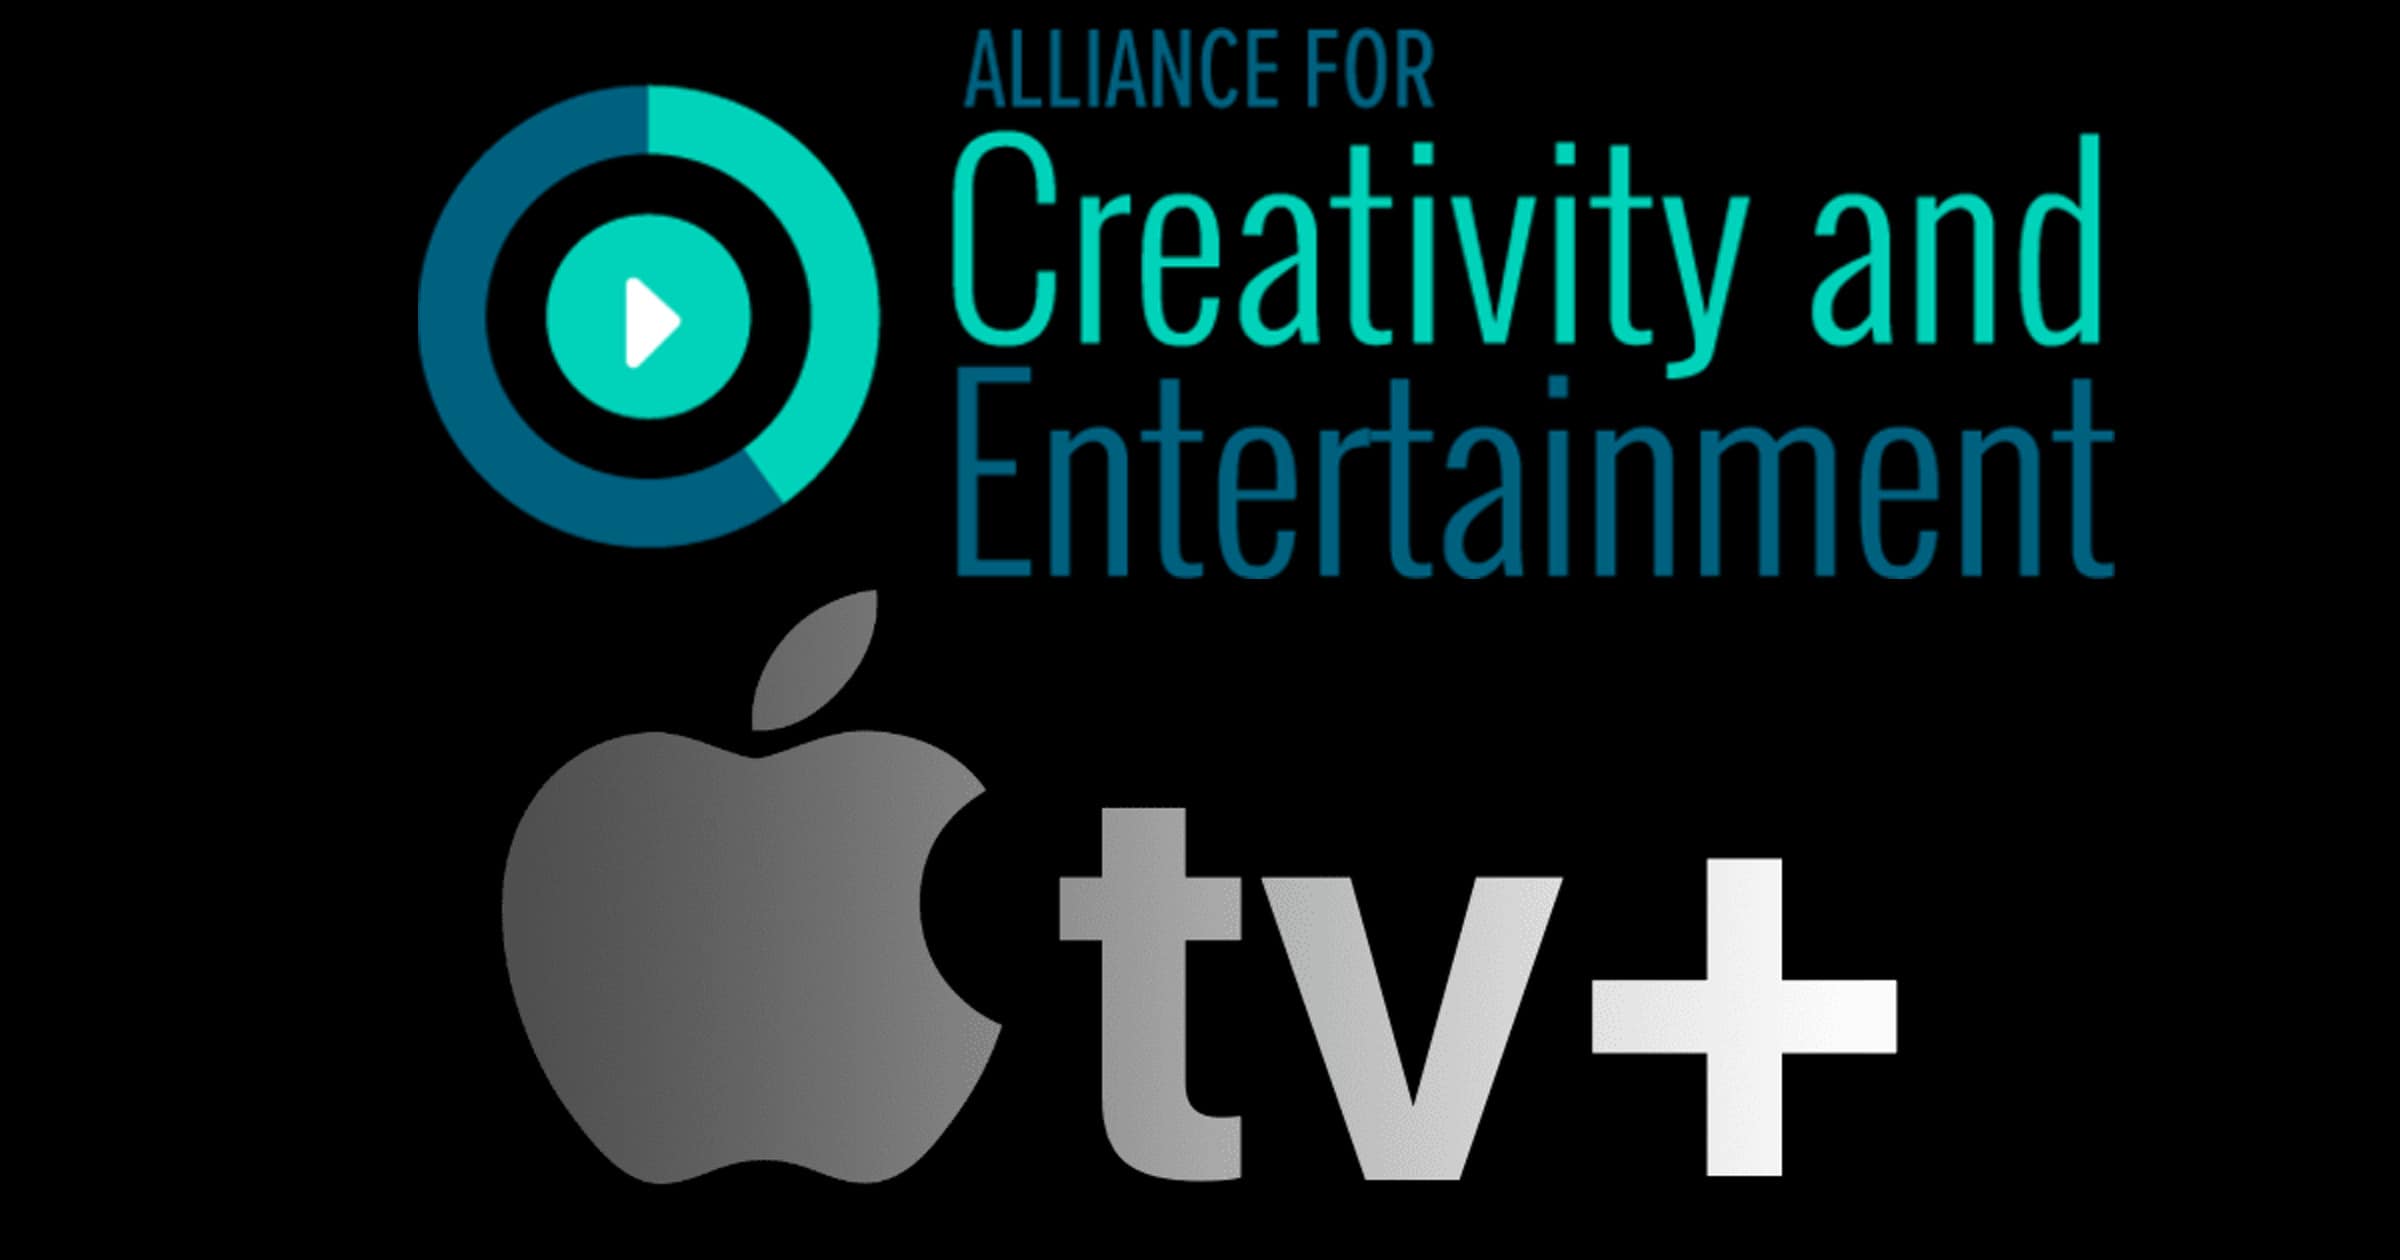 Apple TV+ Joins Alliance for Creativity and Entertainment (ACE)